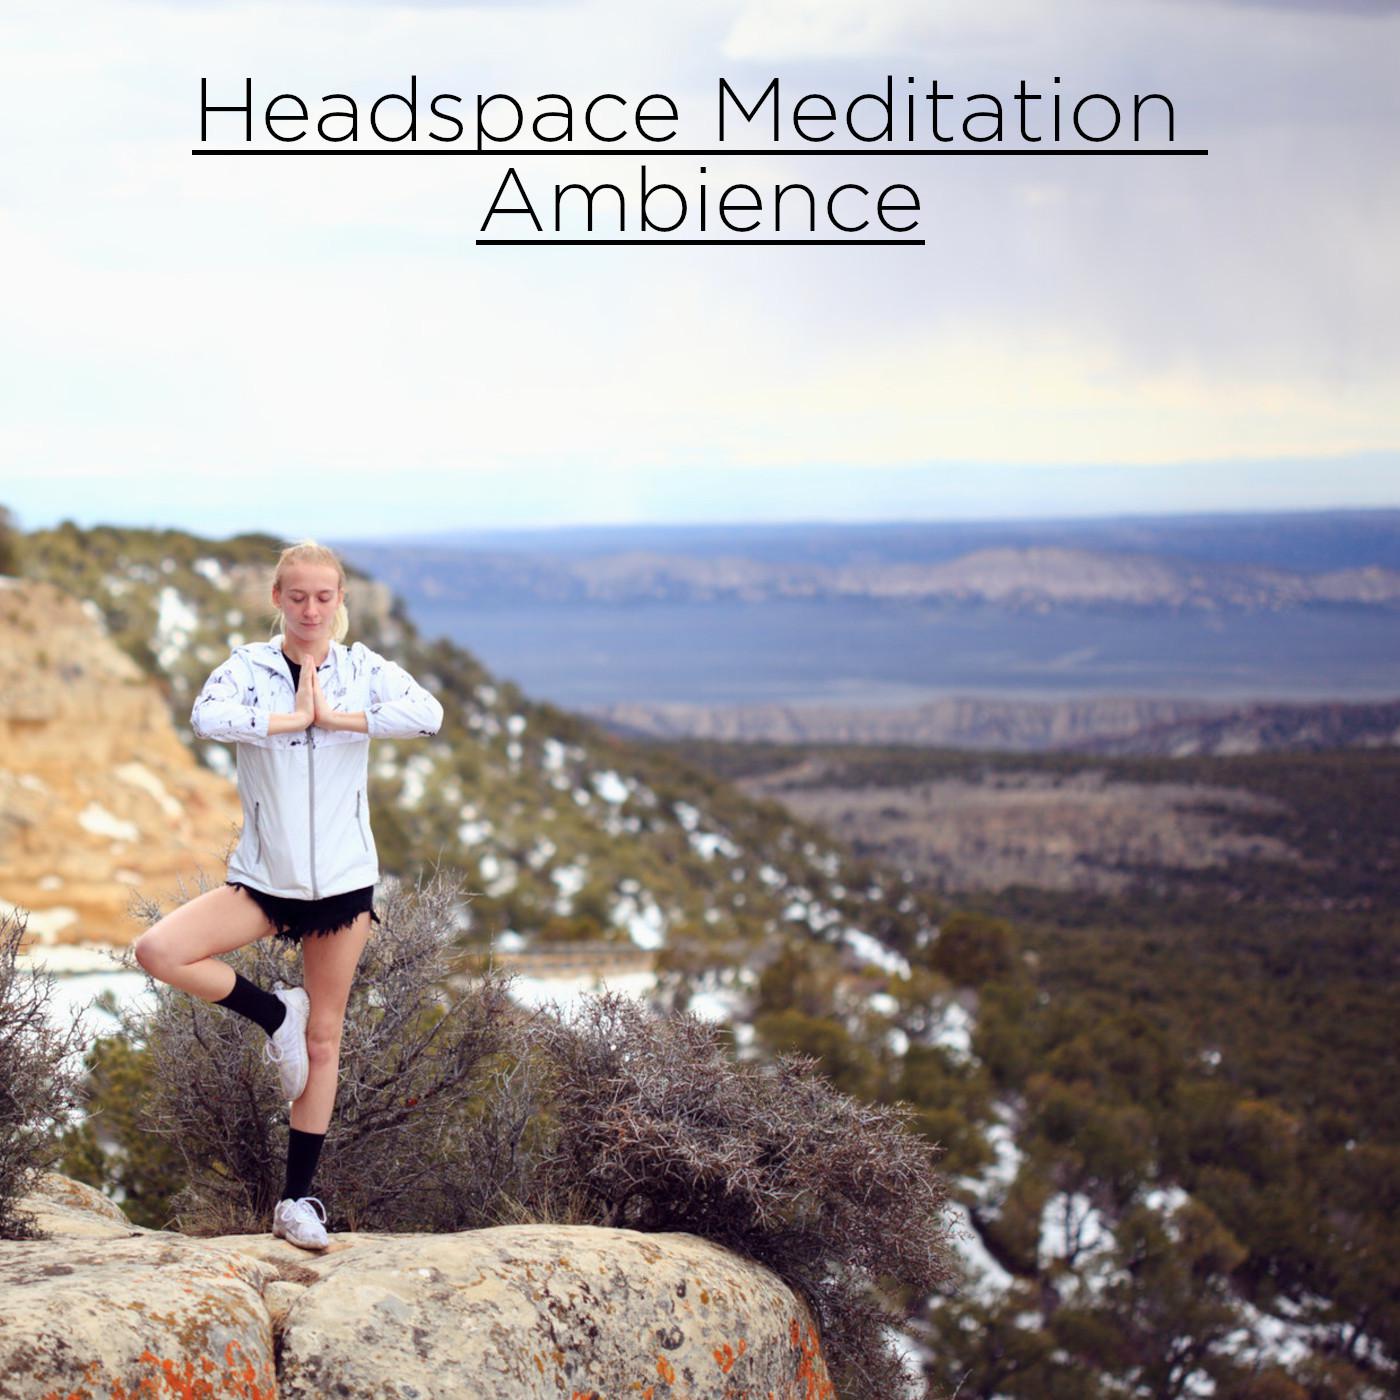 Headspace Meditation Ambience